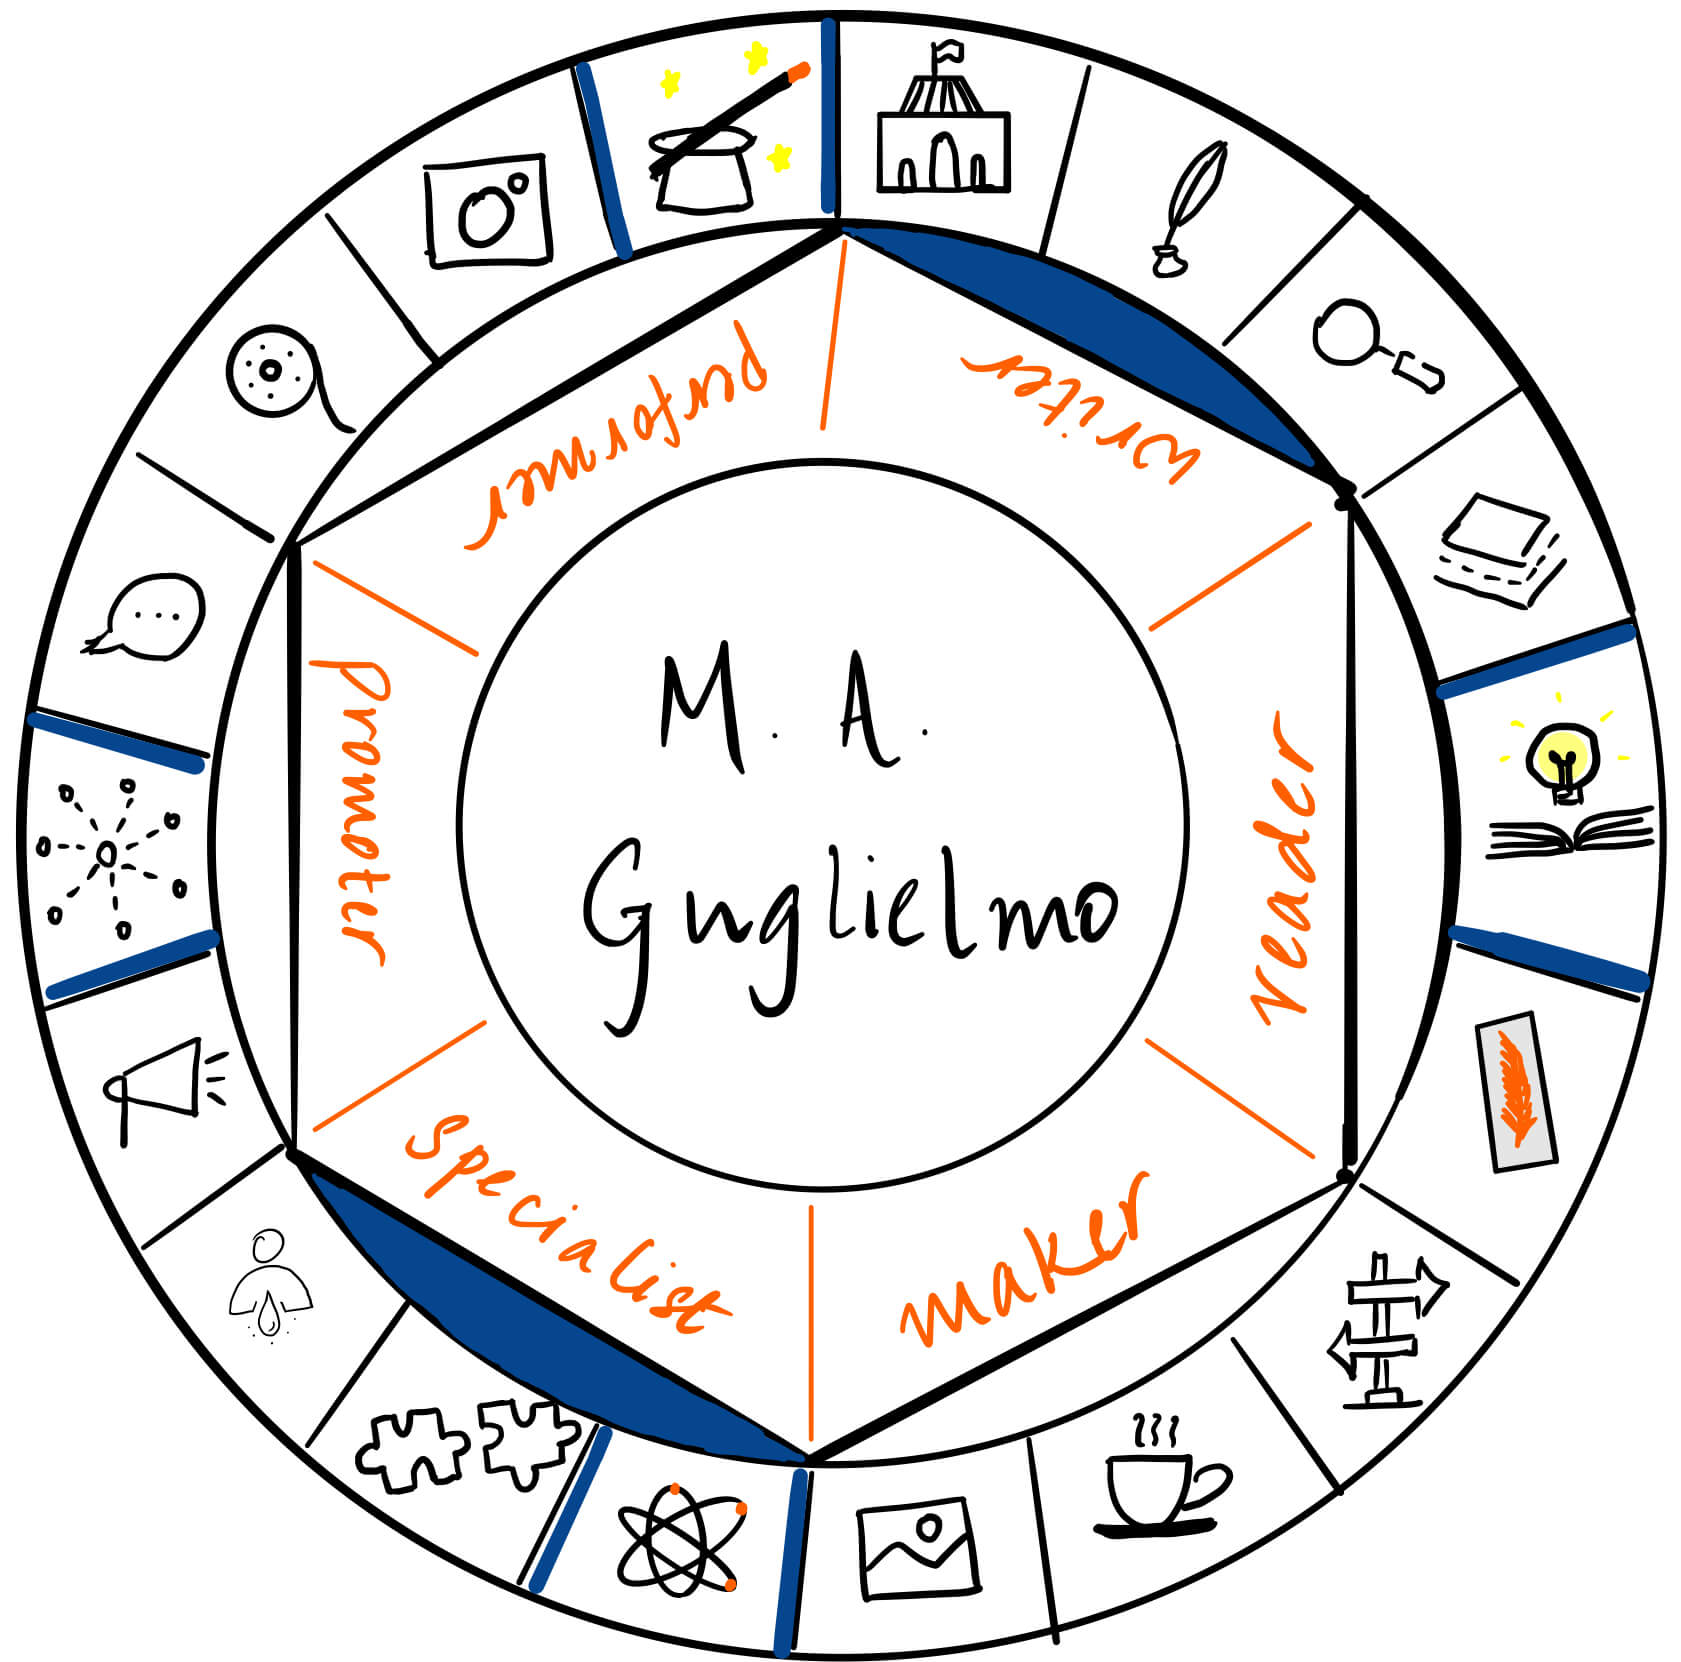 M A Guglielmo is a writer and specialist. It's a pleasure to have her over for a guest post on The Creator's Roulette to talk about writing diverse characters.